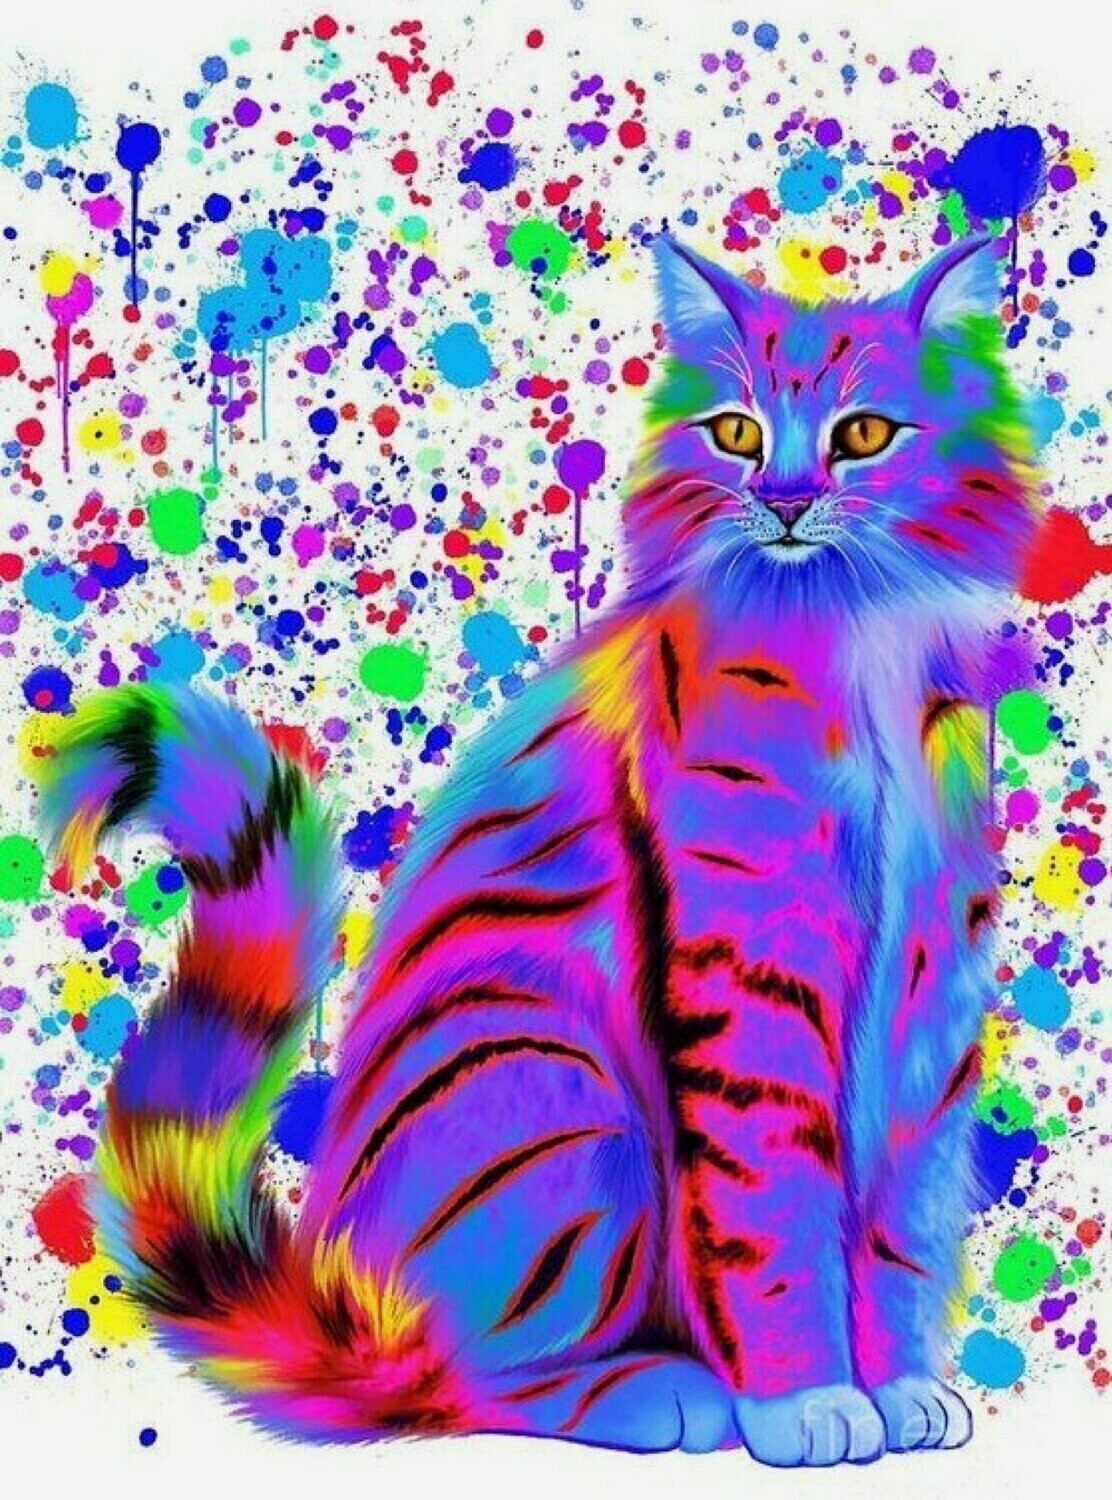 Colourful Cat 06 - Full Drill Diamond Painting - Specially ordered for you. Delivery is approximately 4 - 6 weeks.